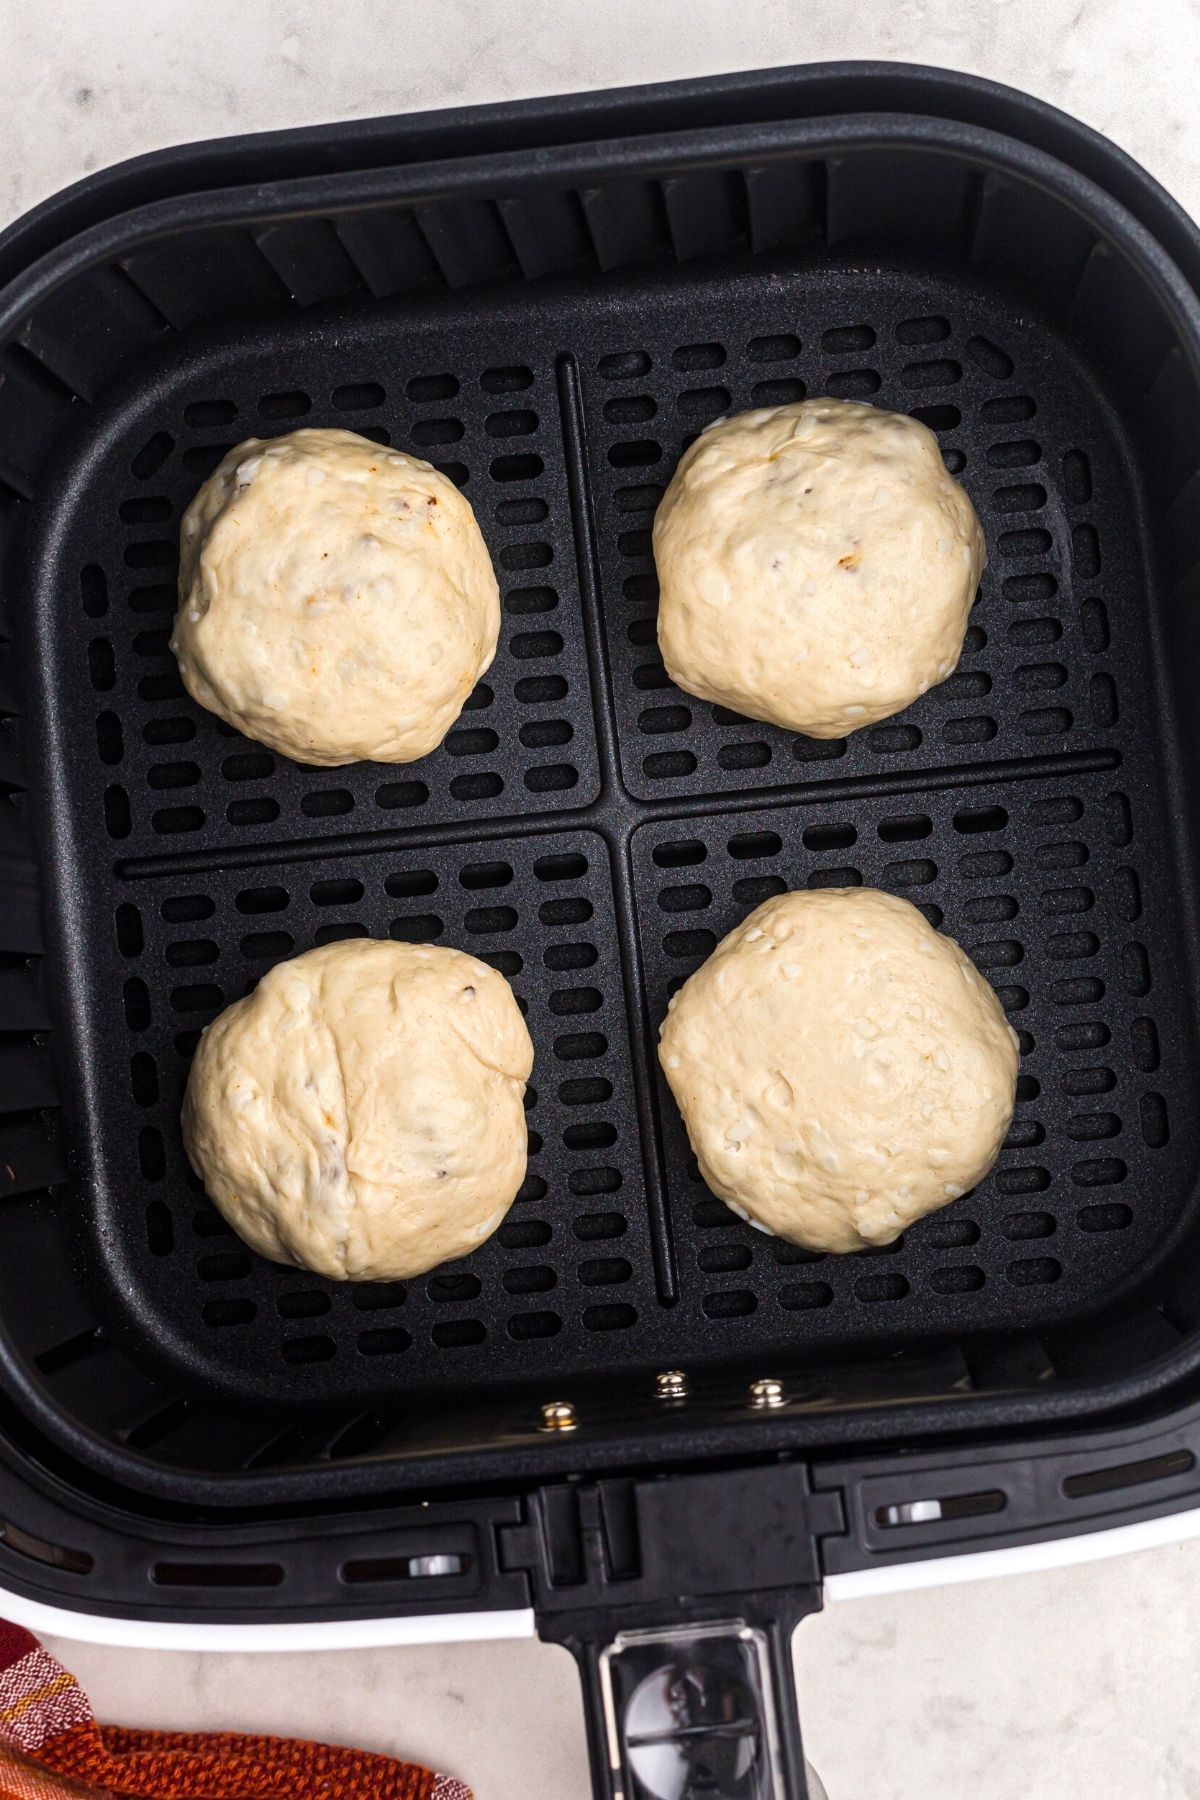 Raw biscuit dough filled with meat and cheese in the air fryer basket